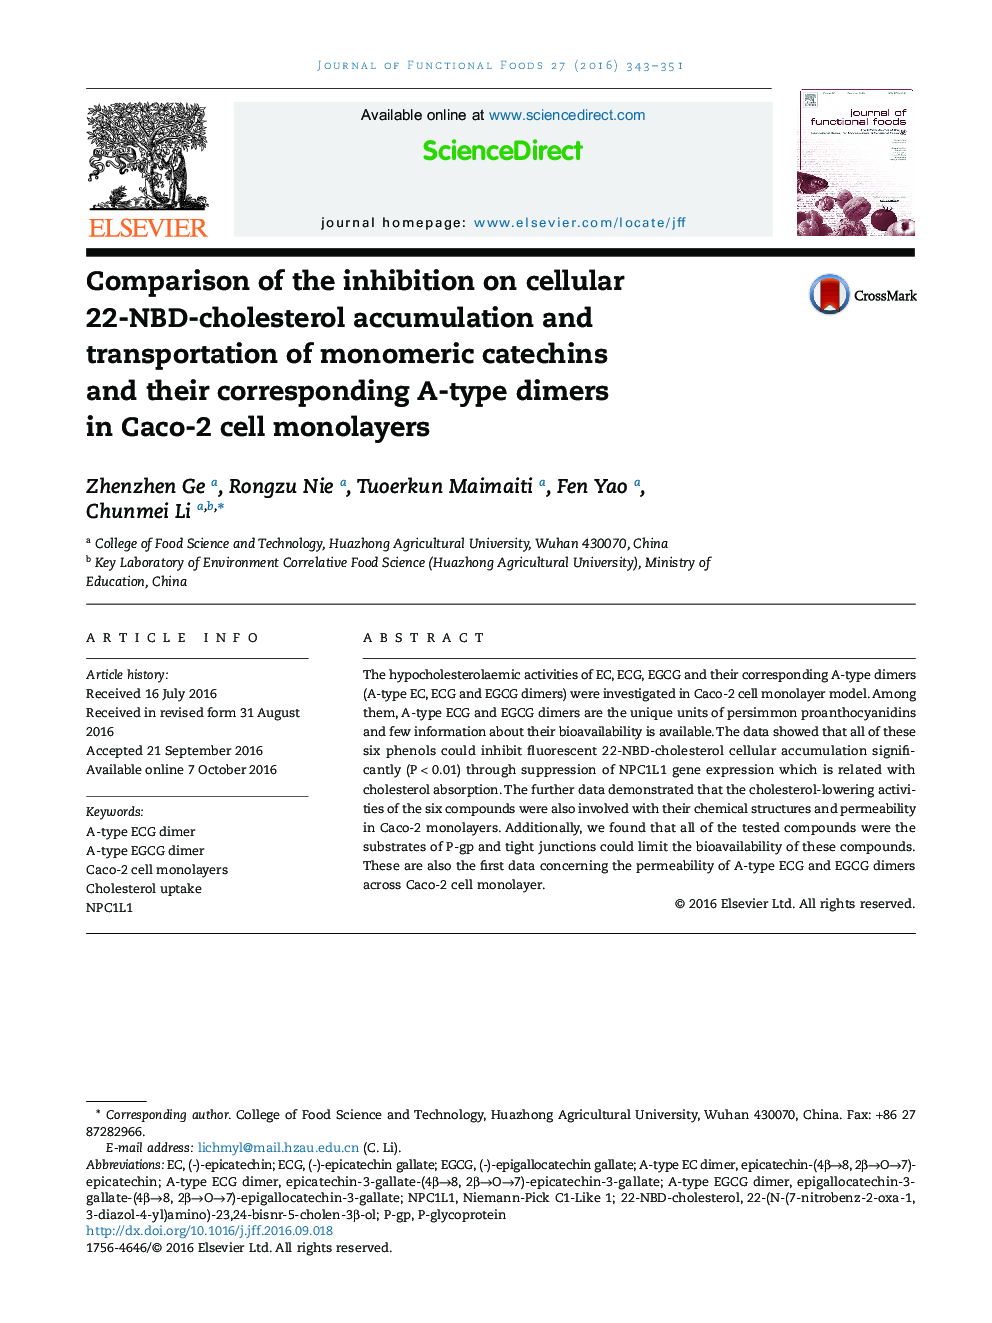 Comparison of the inhibition on cellular 22-NBD-cholesterol accumulation and transportation of monomeric catechins and their corresponding A-type dimers in Caco-2 cell monolayers